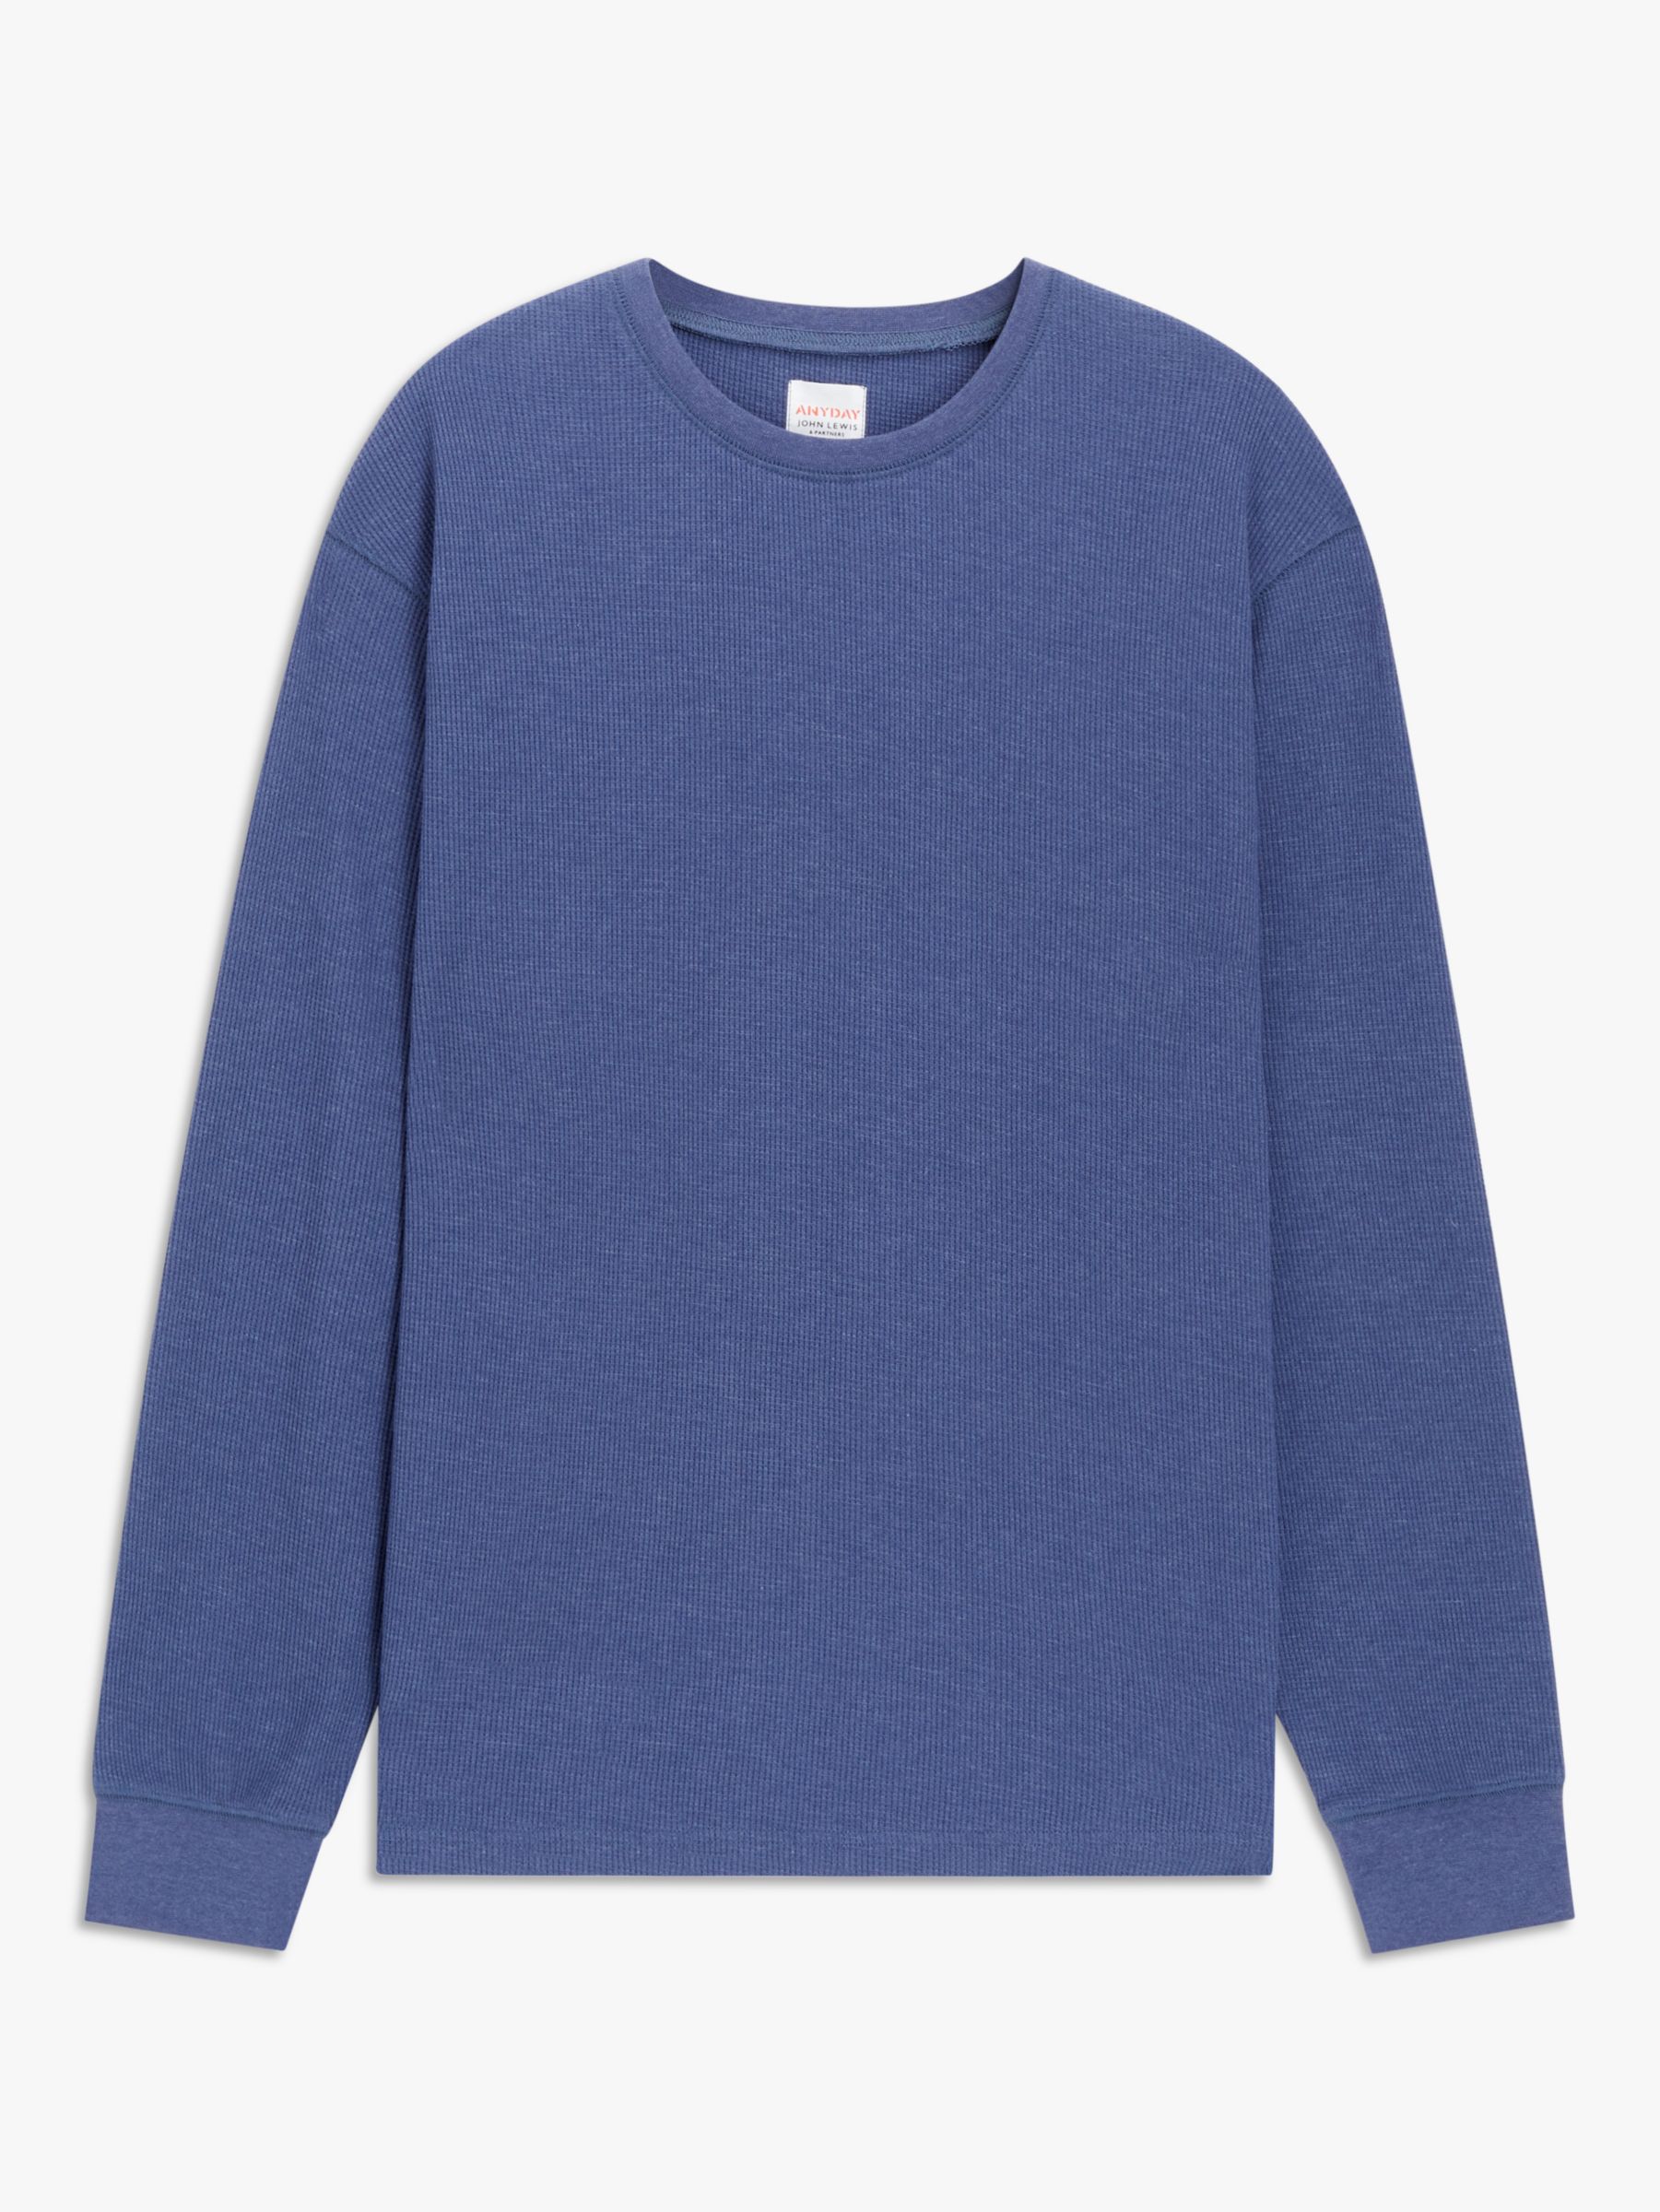 John Lewis ANYDAY Waffle Cotton Blend Long Sleeve Lounge Top, Twilight Blue, L